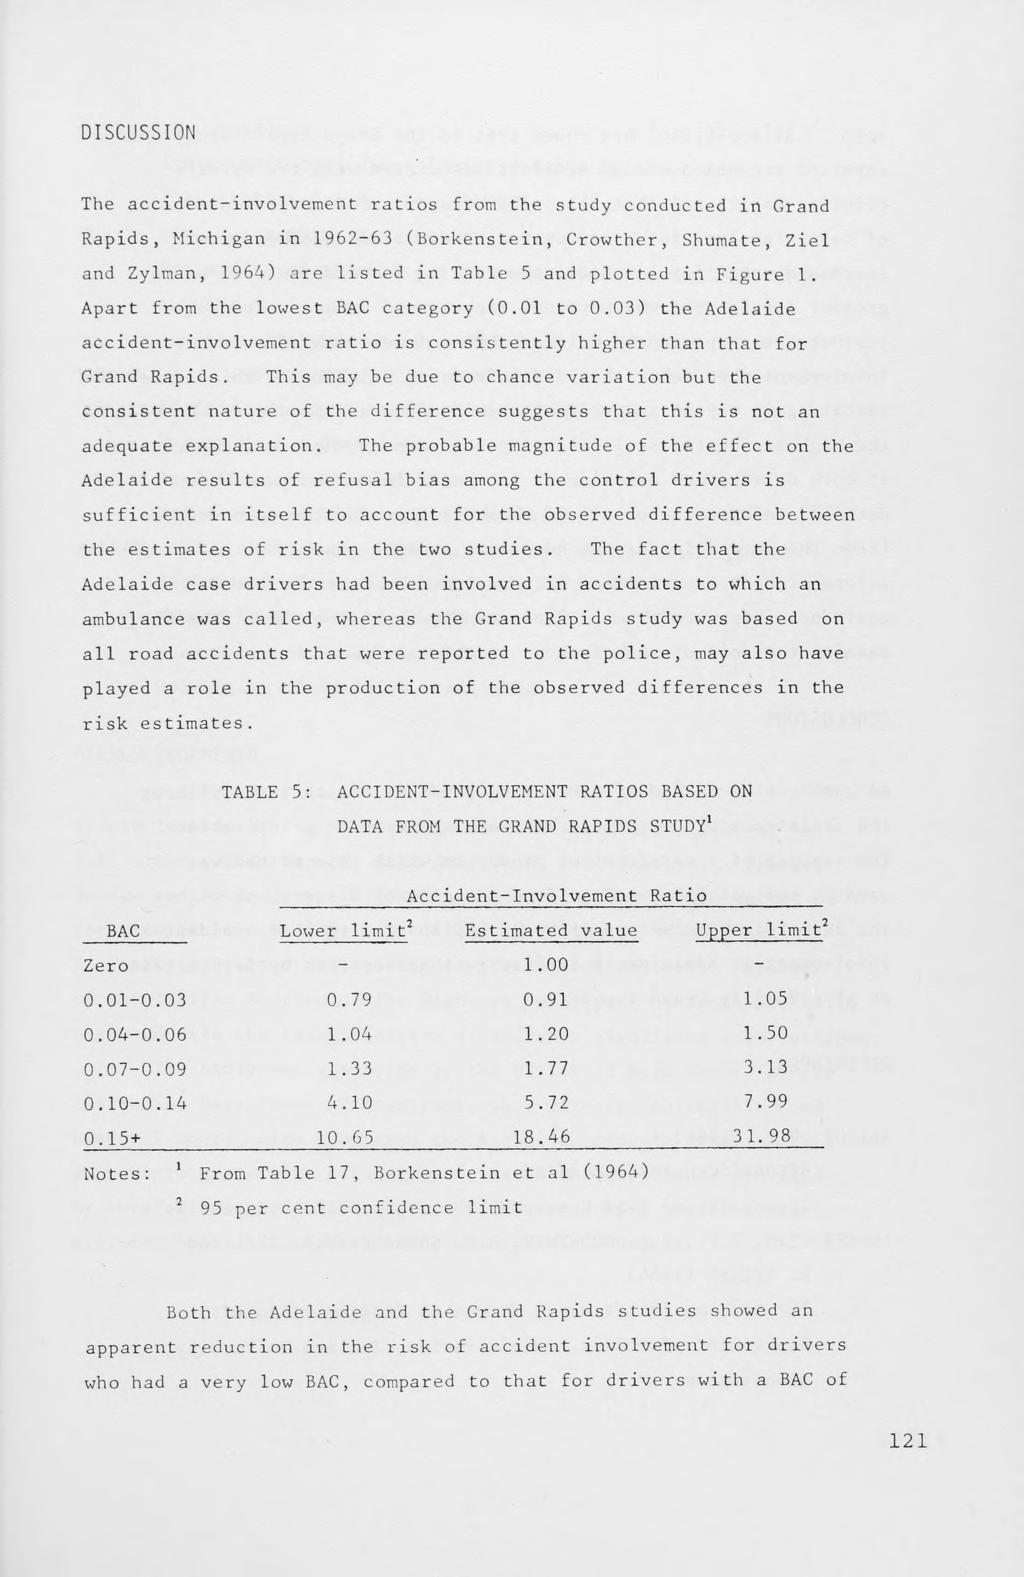 DISCUSSION The accident-involvement ratios from the study conducted in Grand Rapids, Michigan in 1962-63 (Borkenstein, Crowther, Shumate, Ziel and Zylman, 1964) are listed in Table 5 and plotted in